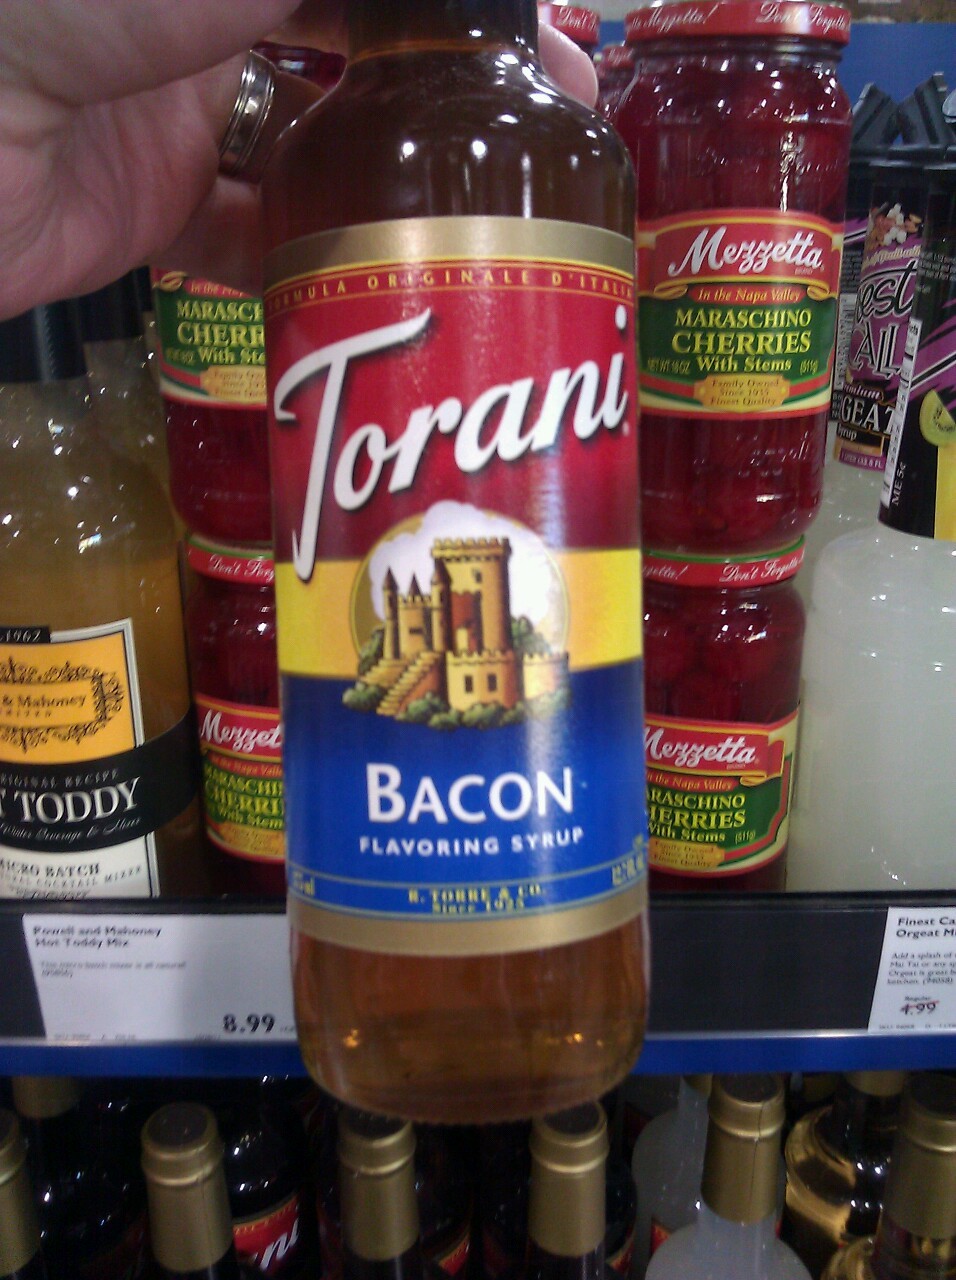 A bottle of bacon flavored syrup by Torani.